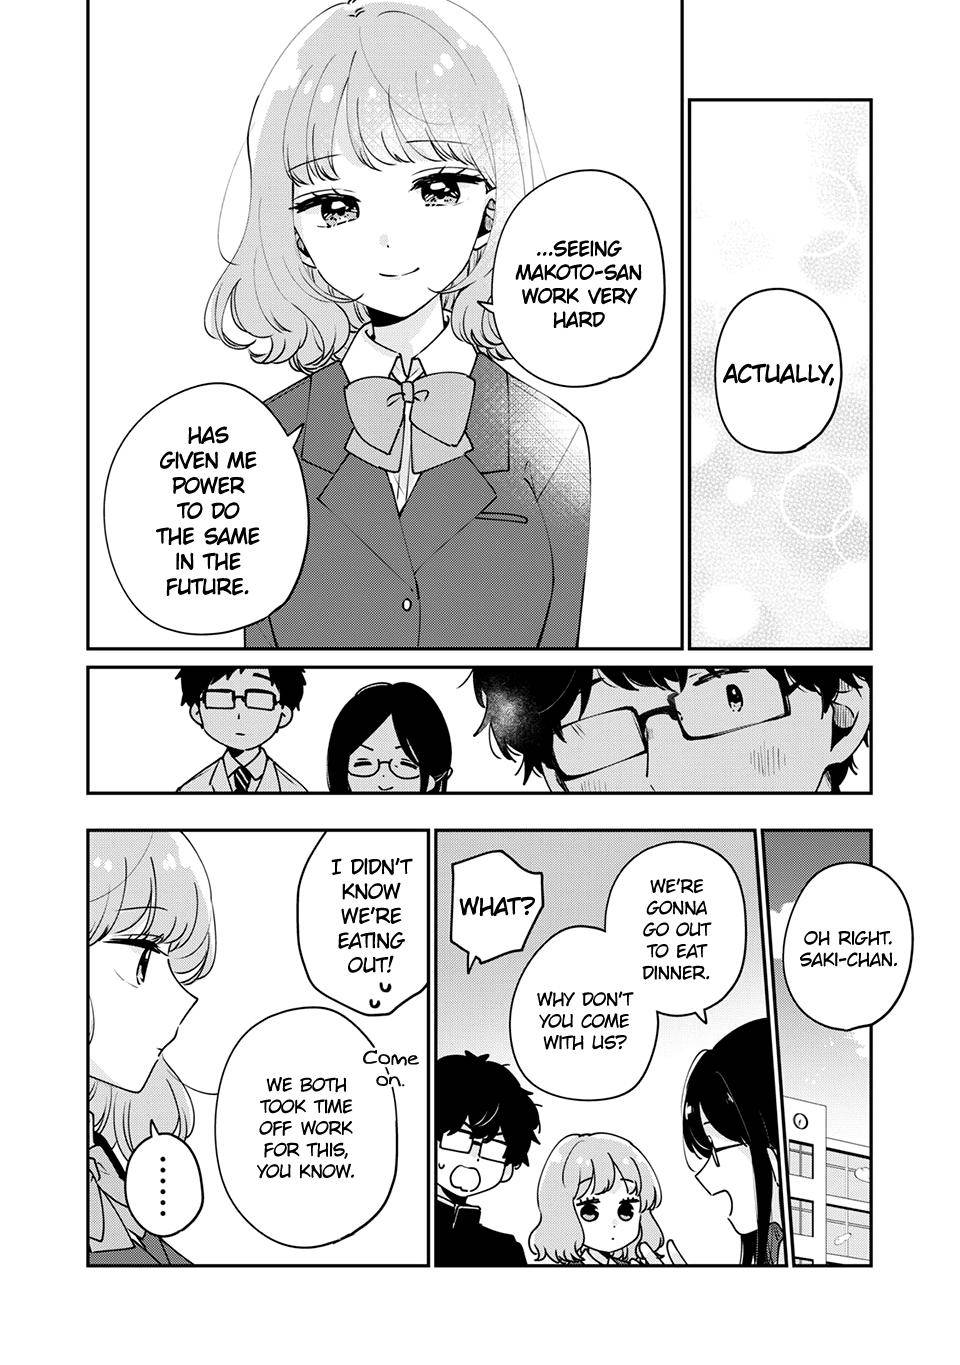 It's Not Meguro-san's First Time chapter 47 page 11